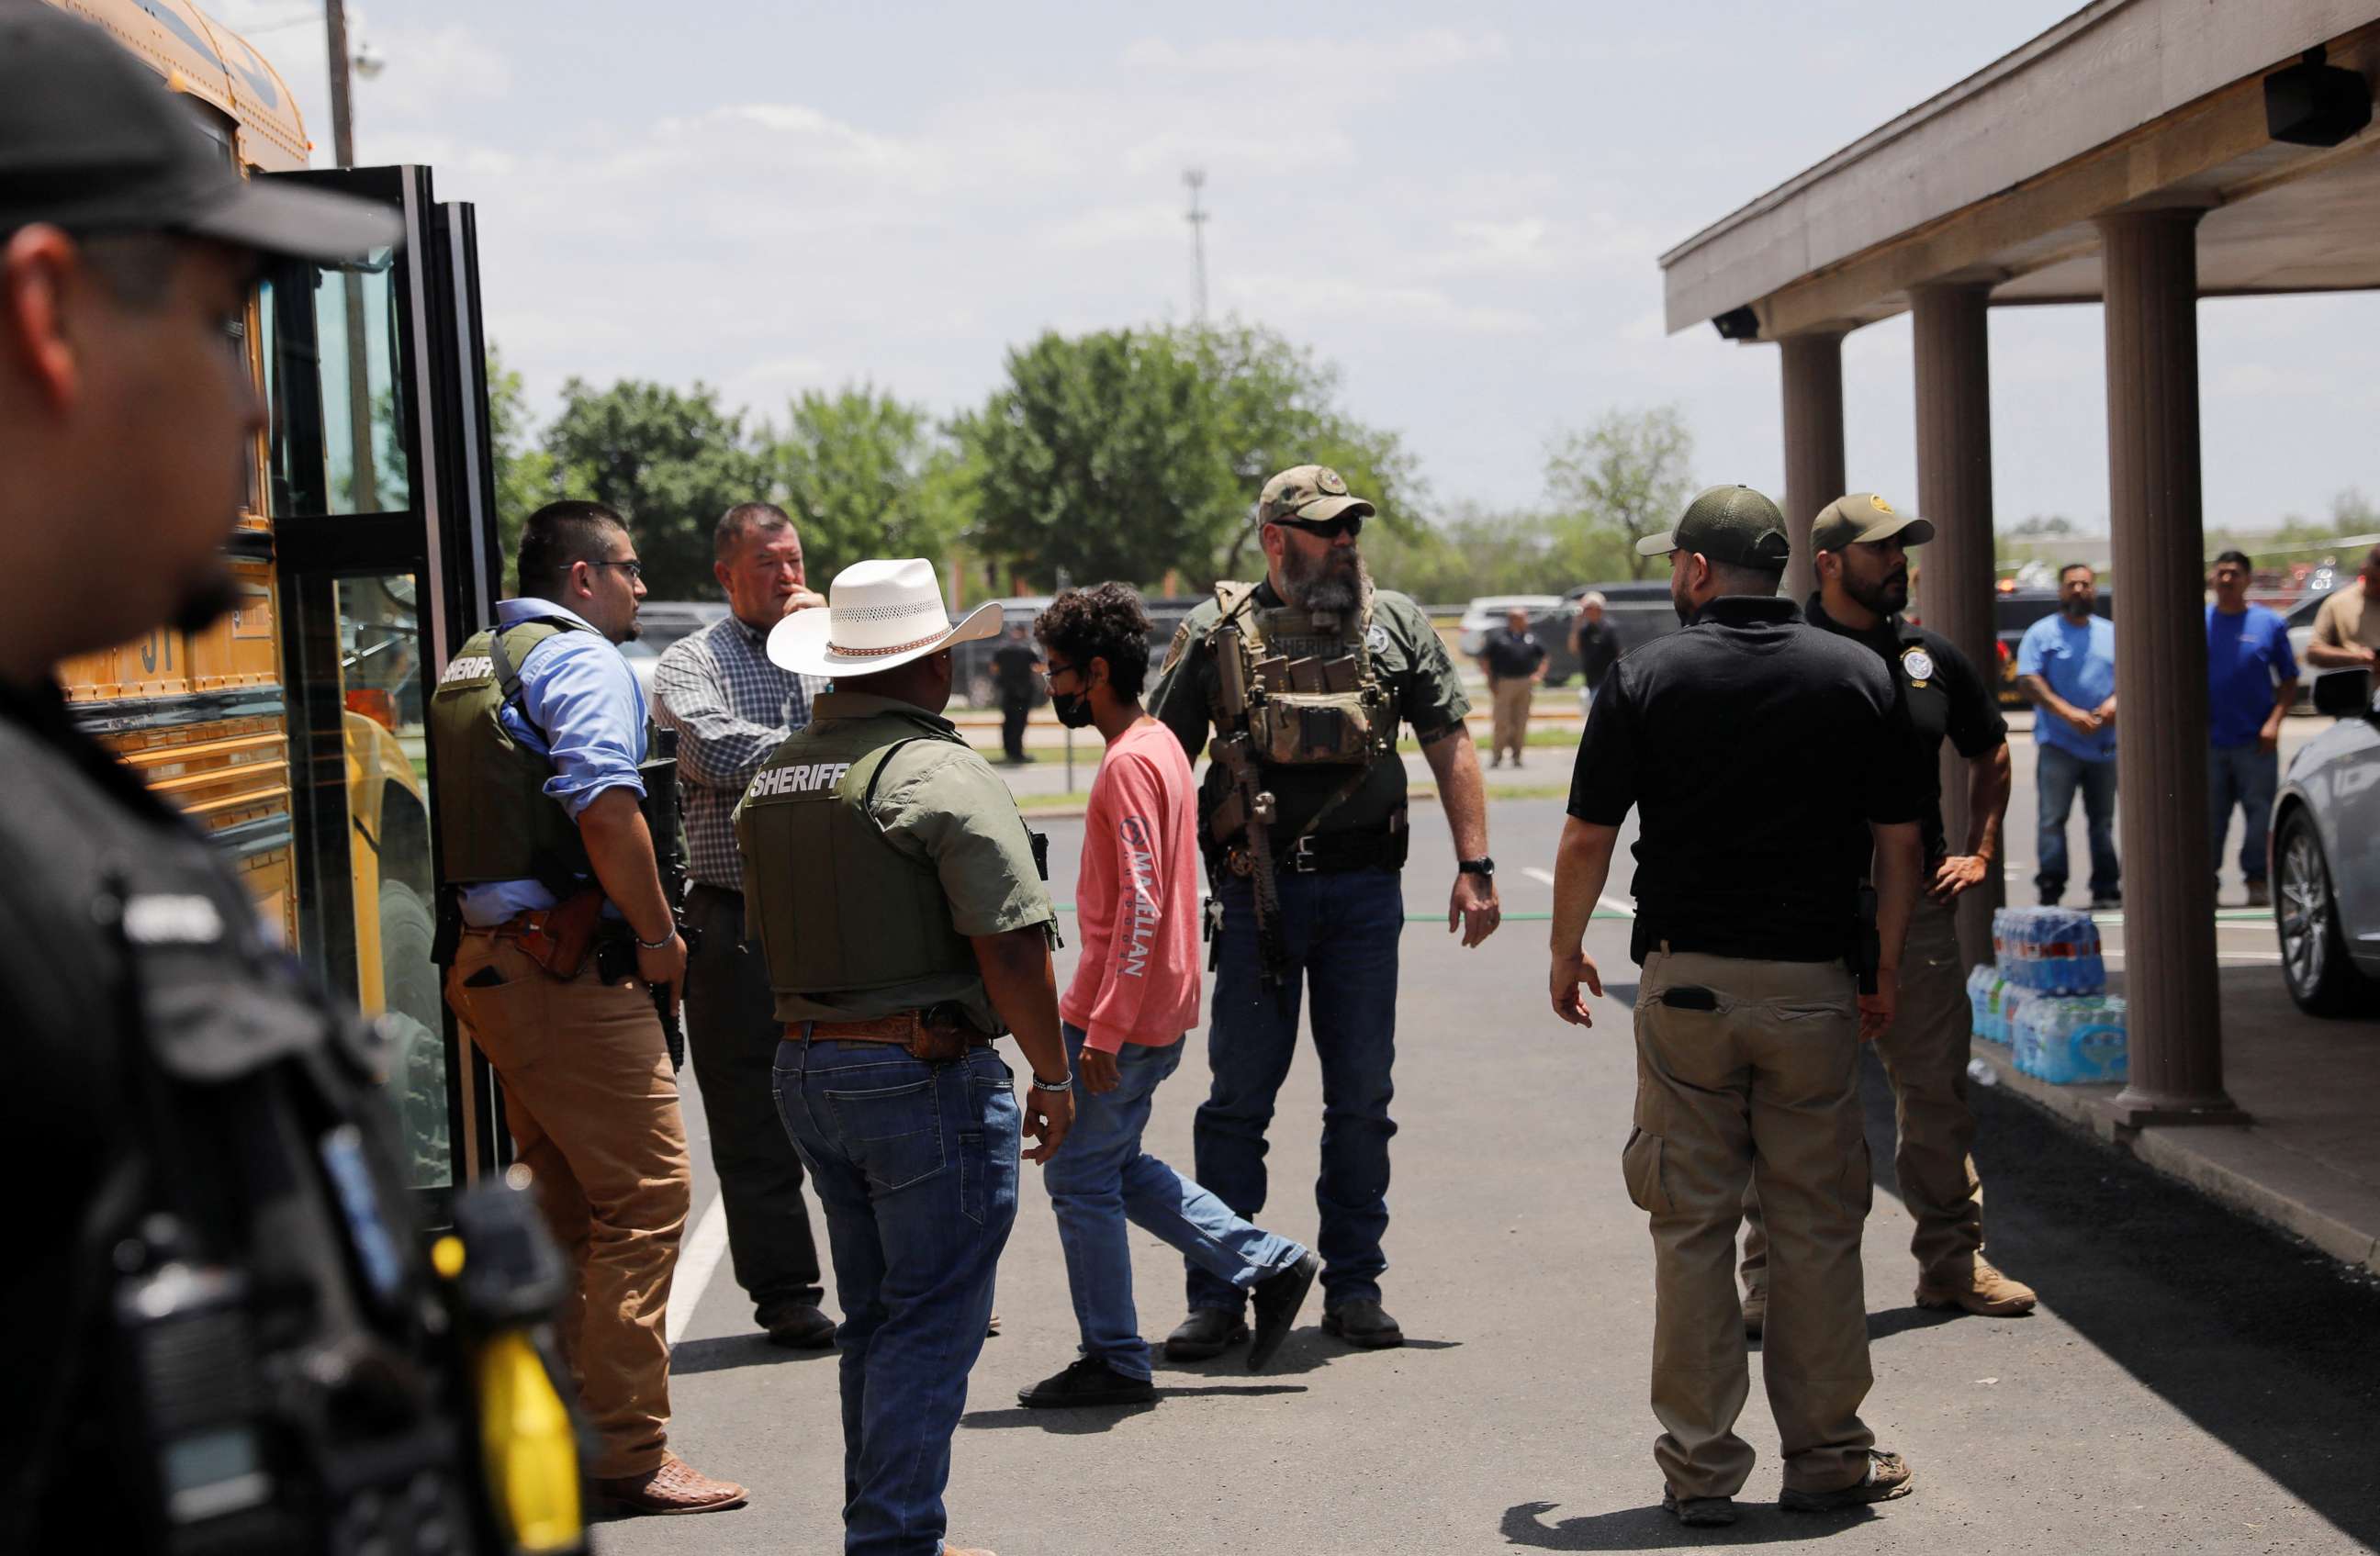 PHOTO: Children get on a school bus as law enforcement personnel guard the scene of a suspected shooting near Robb Elementary School in Uvalde, Texas, May 24, 2022.